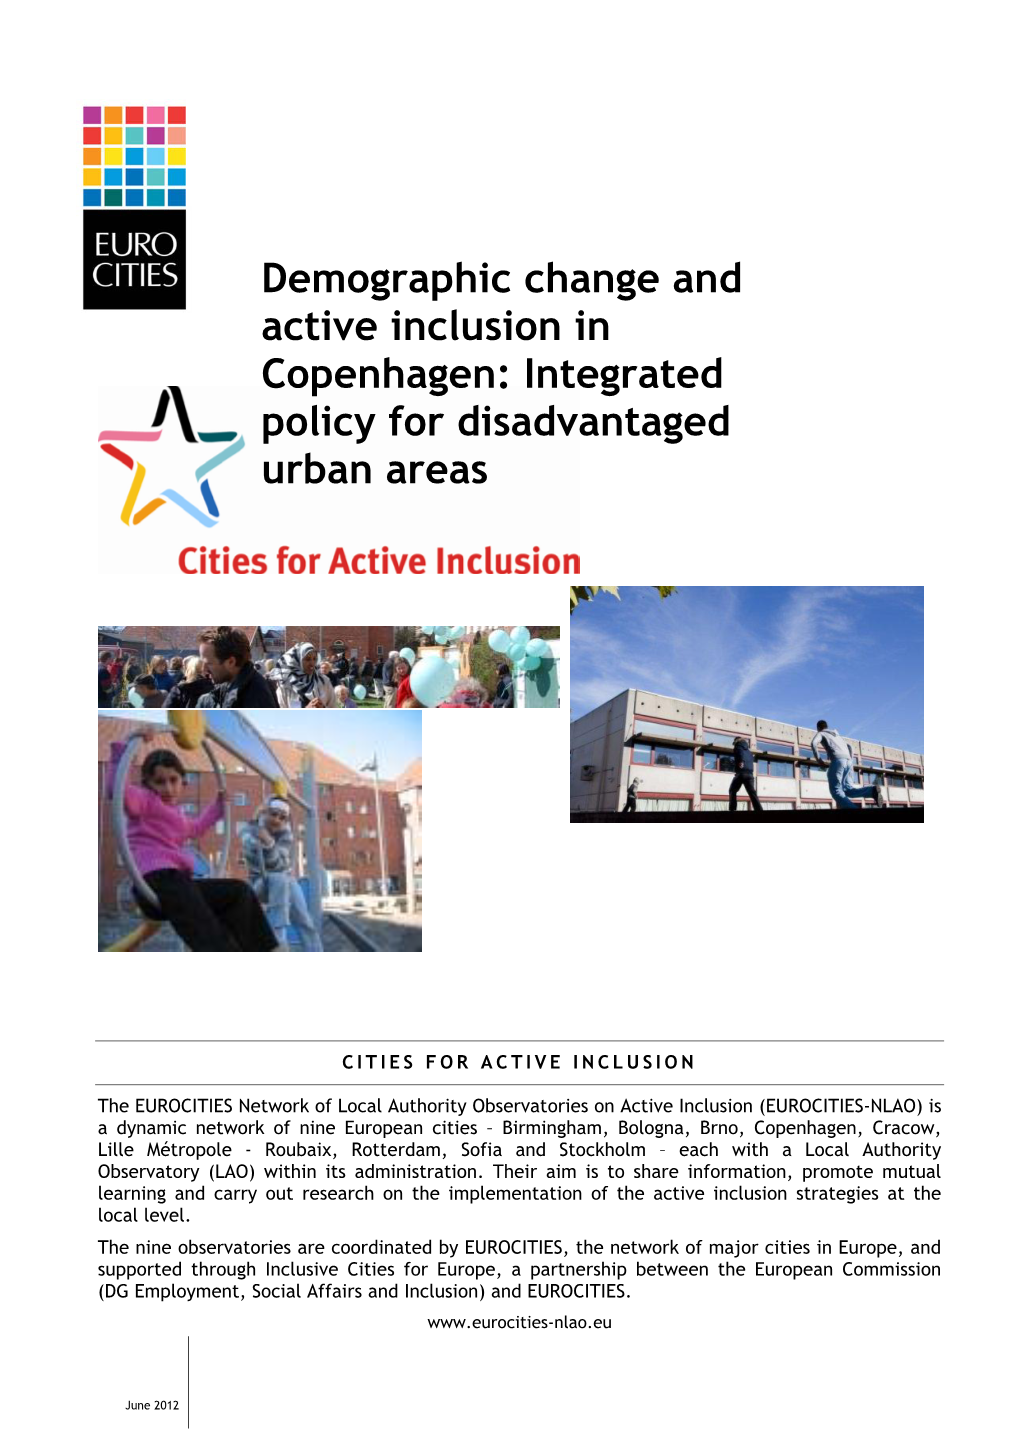 Demographic Change and Active Inclusion in Copenhagen: Integrated Policy for Disadvantaged Urban Areas